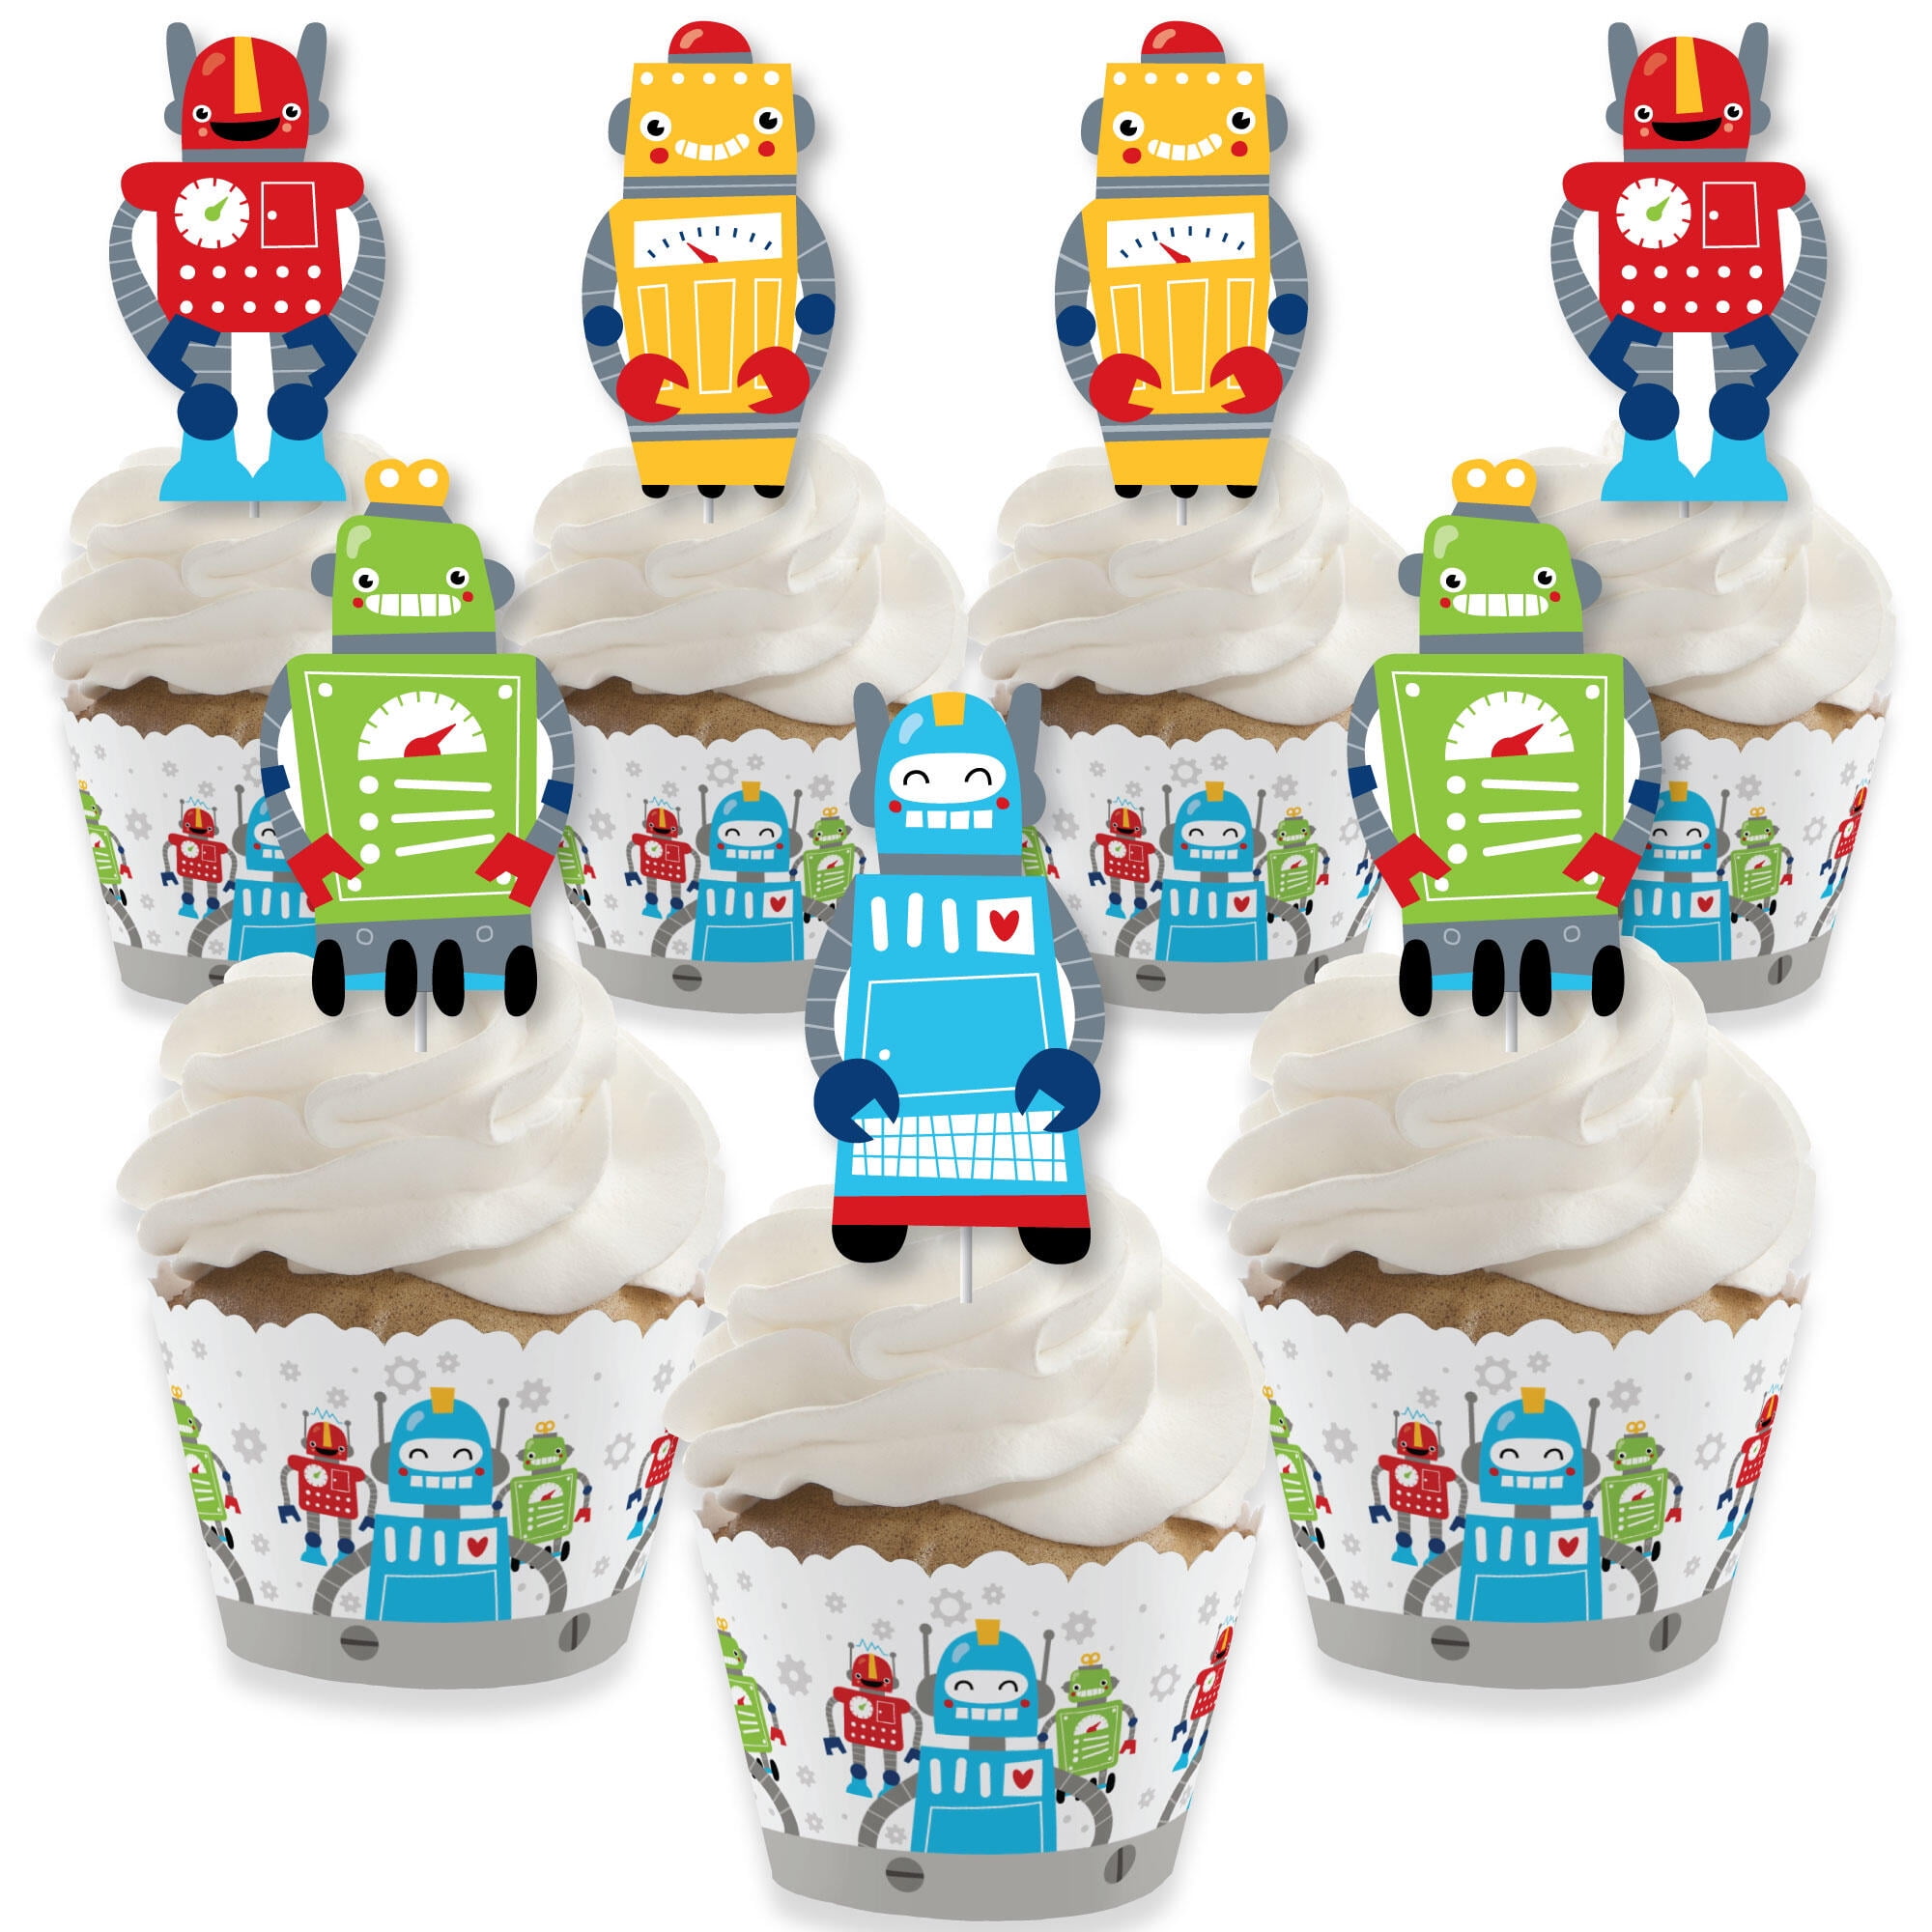 Children Boy Girl Birthday Baby Shower Party Supplies Set of 12 Robot Cupcake Toppers